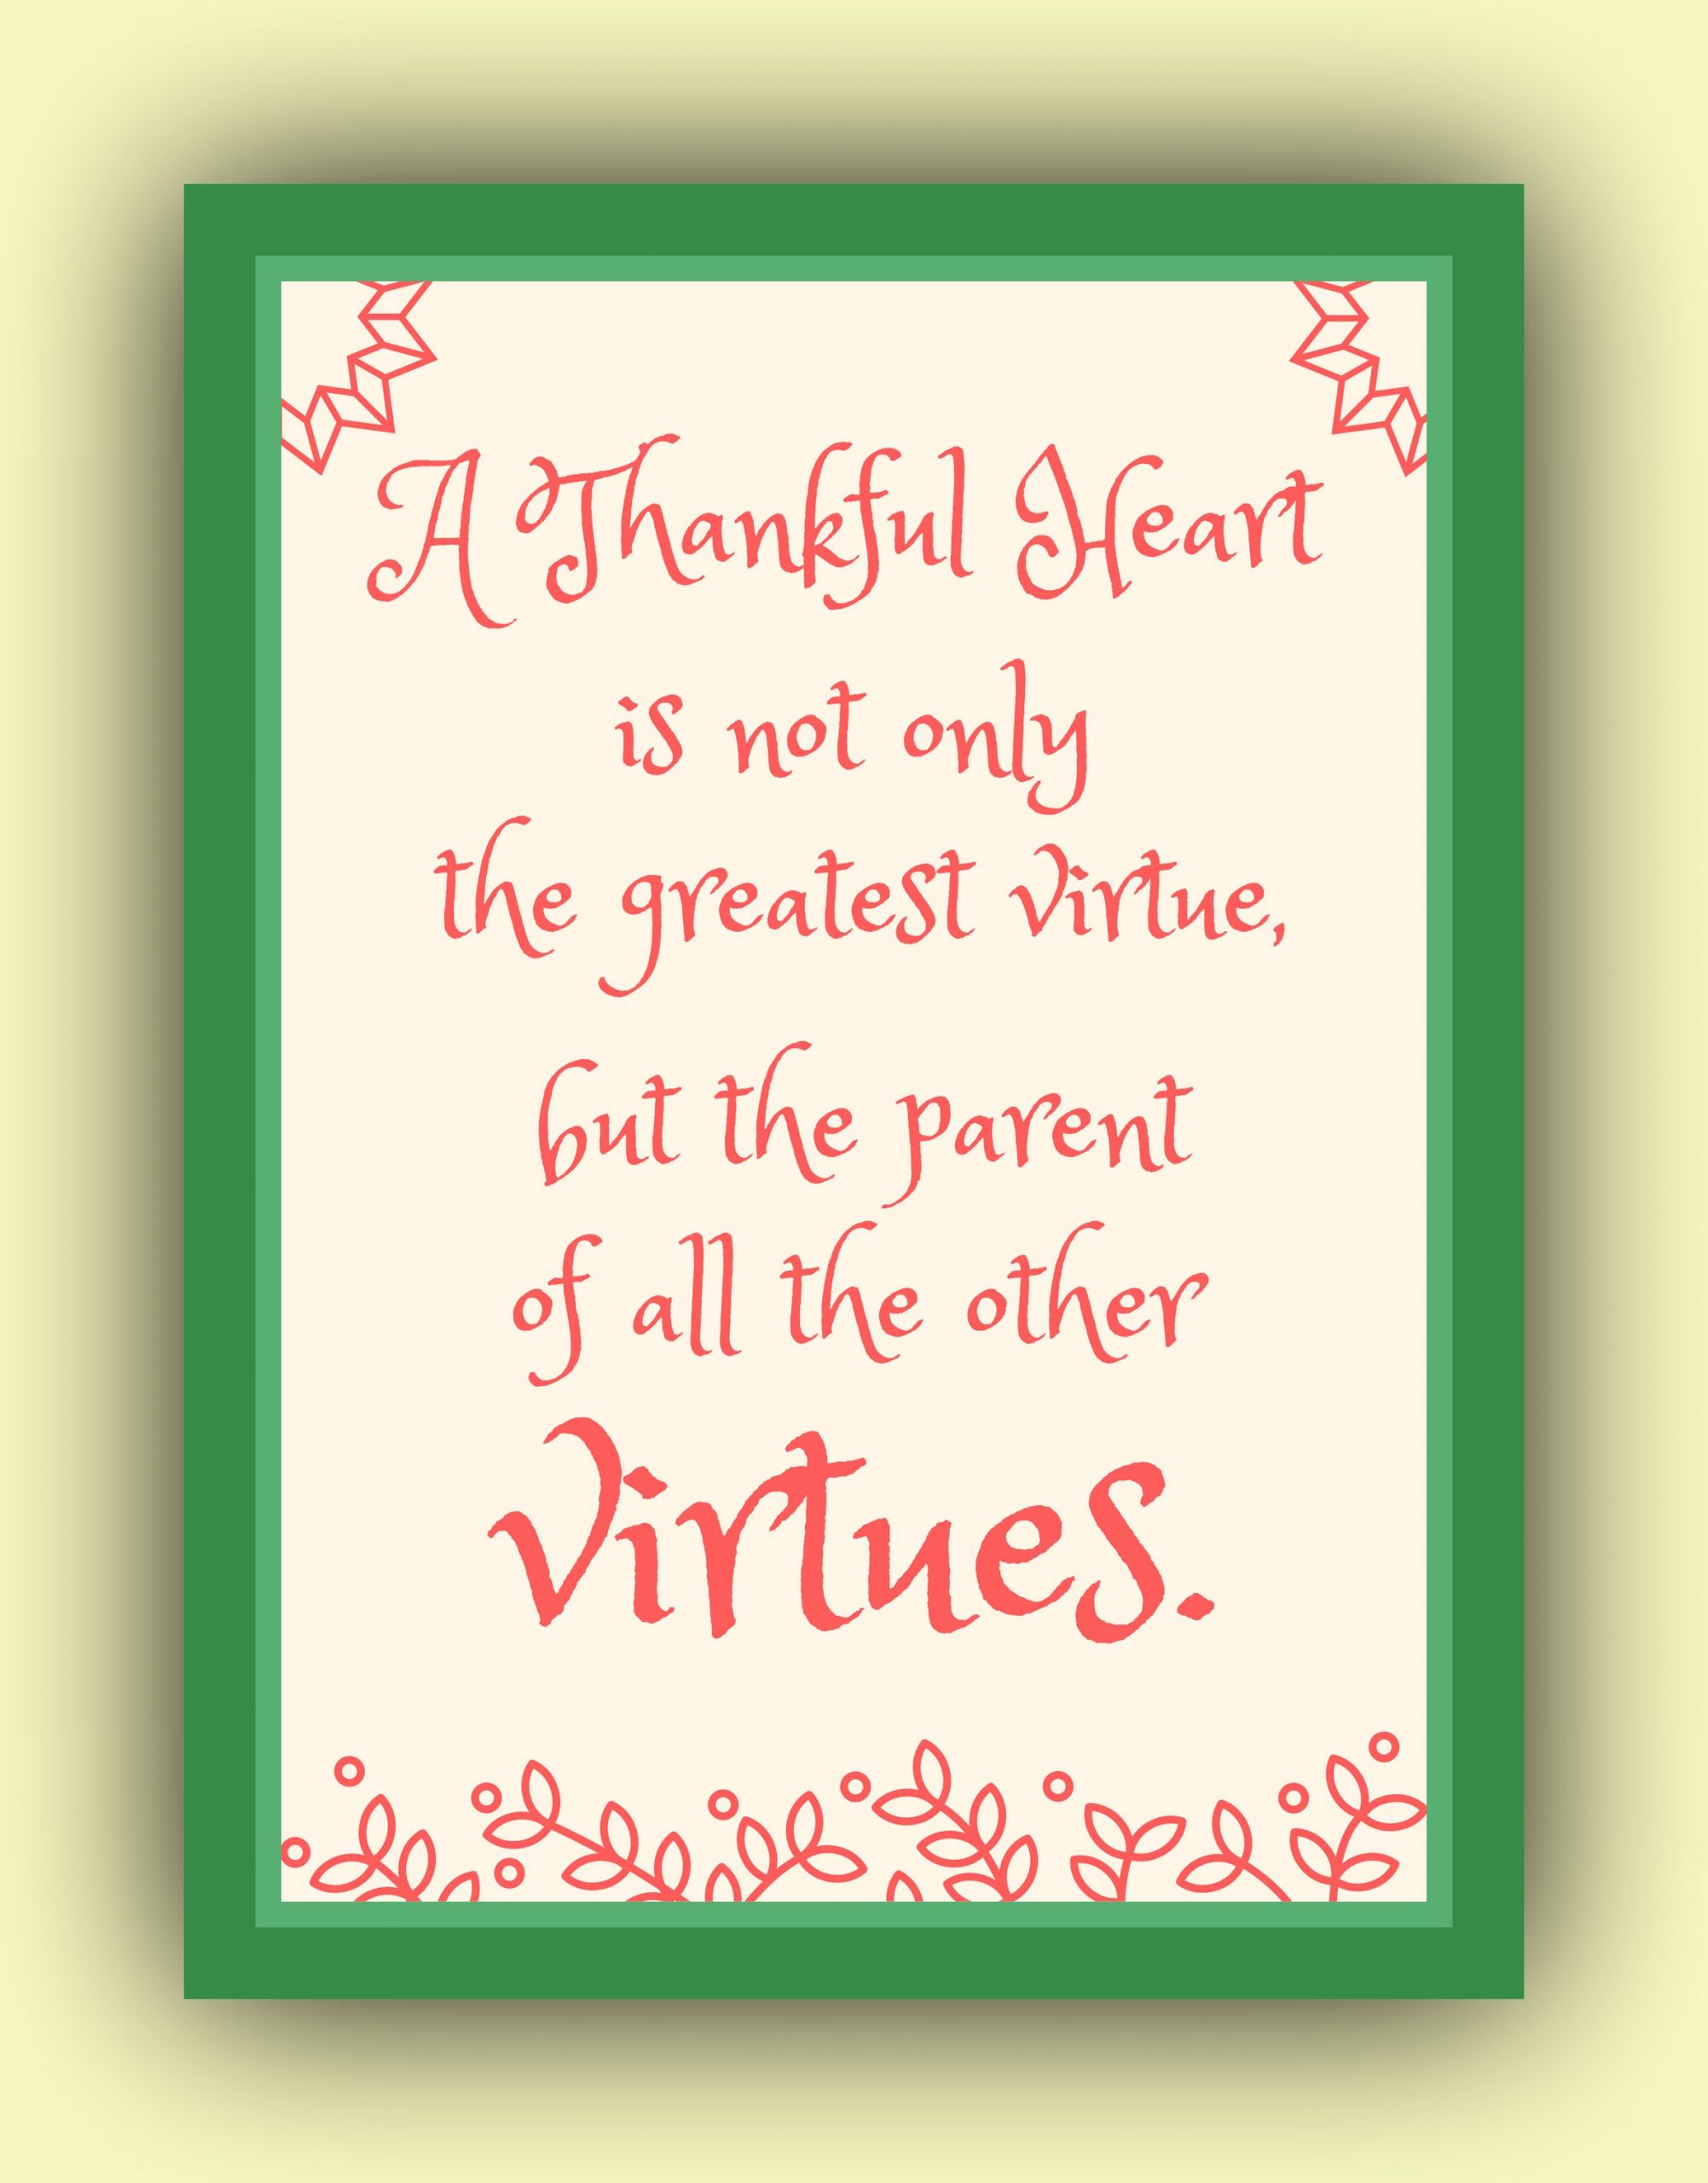 Thanksgiving Quotes Thoughts
 25 Happy Thanksgiving Quotes As family and friends gather